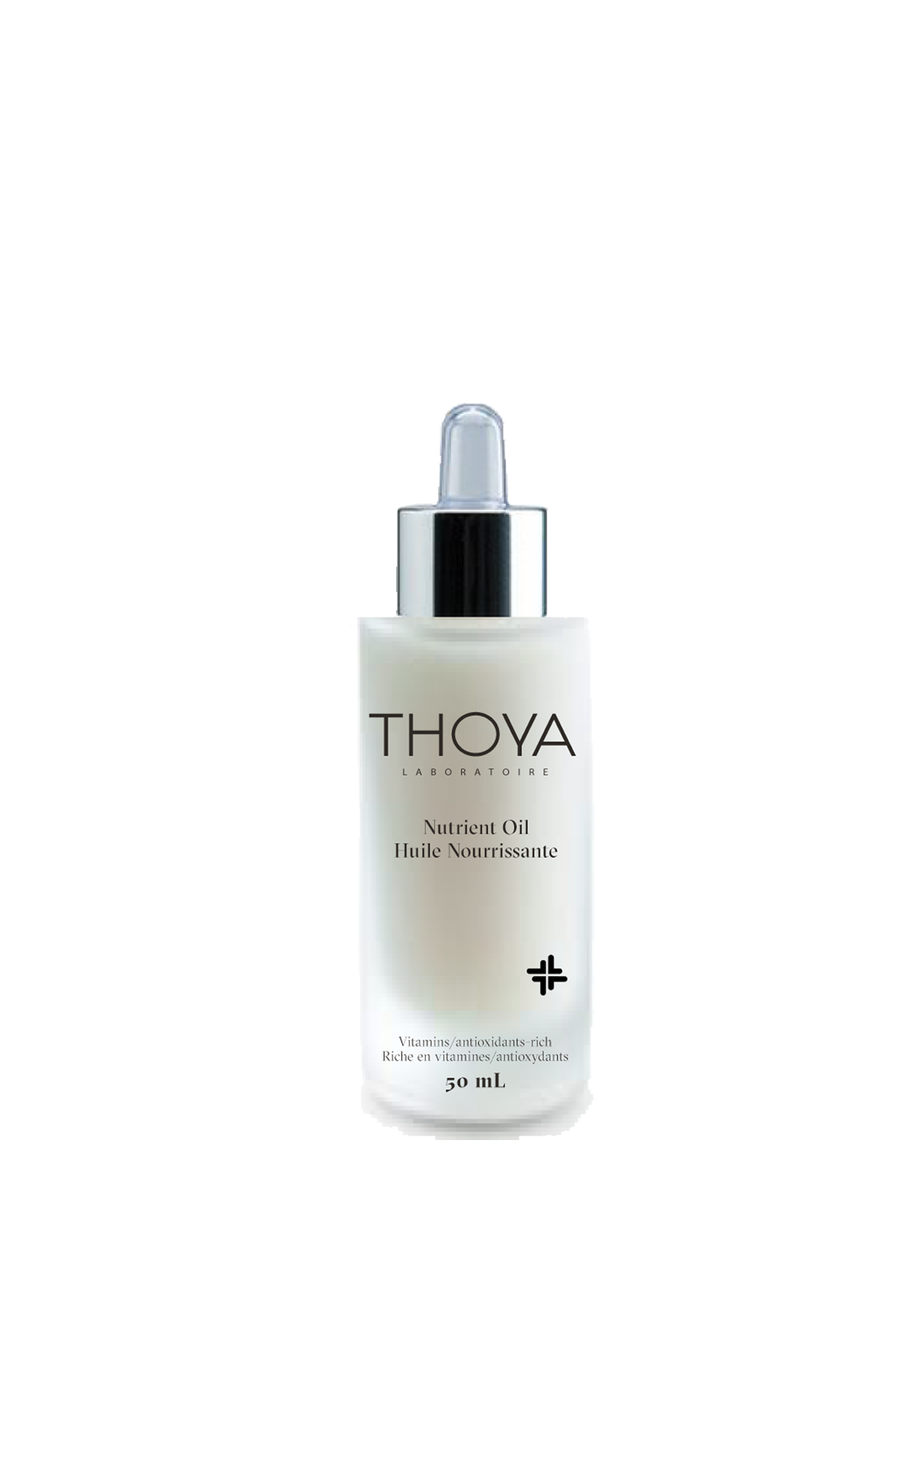 Thoya Nutrient Skin care oil – Dry oil – vitamins and antioxidants - Best all natural skincare - Hypoallergernic - Dermatologist tested - Fragrance free